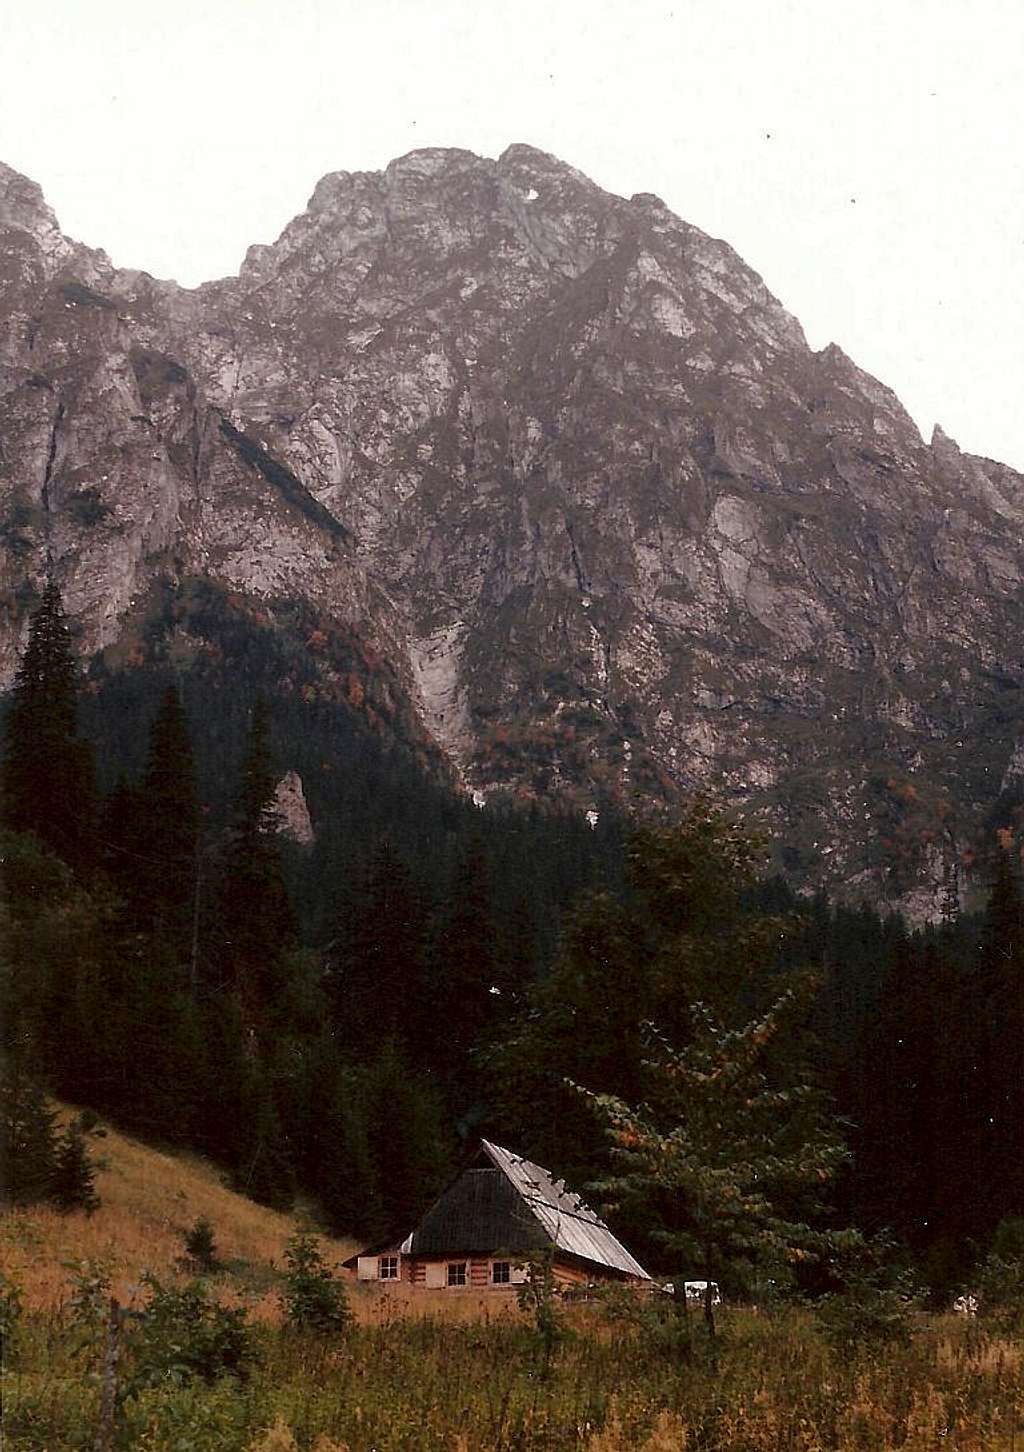 North wall of Giewont